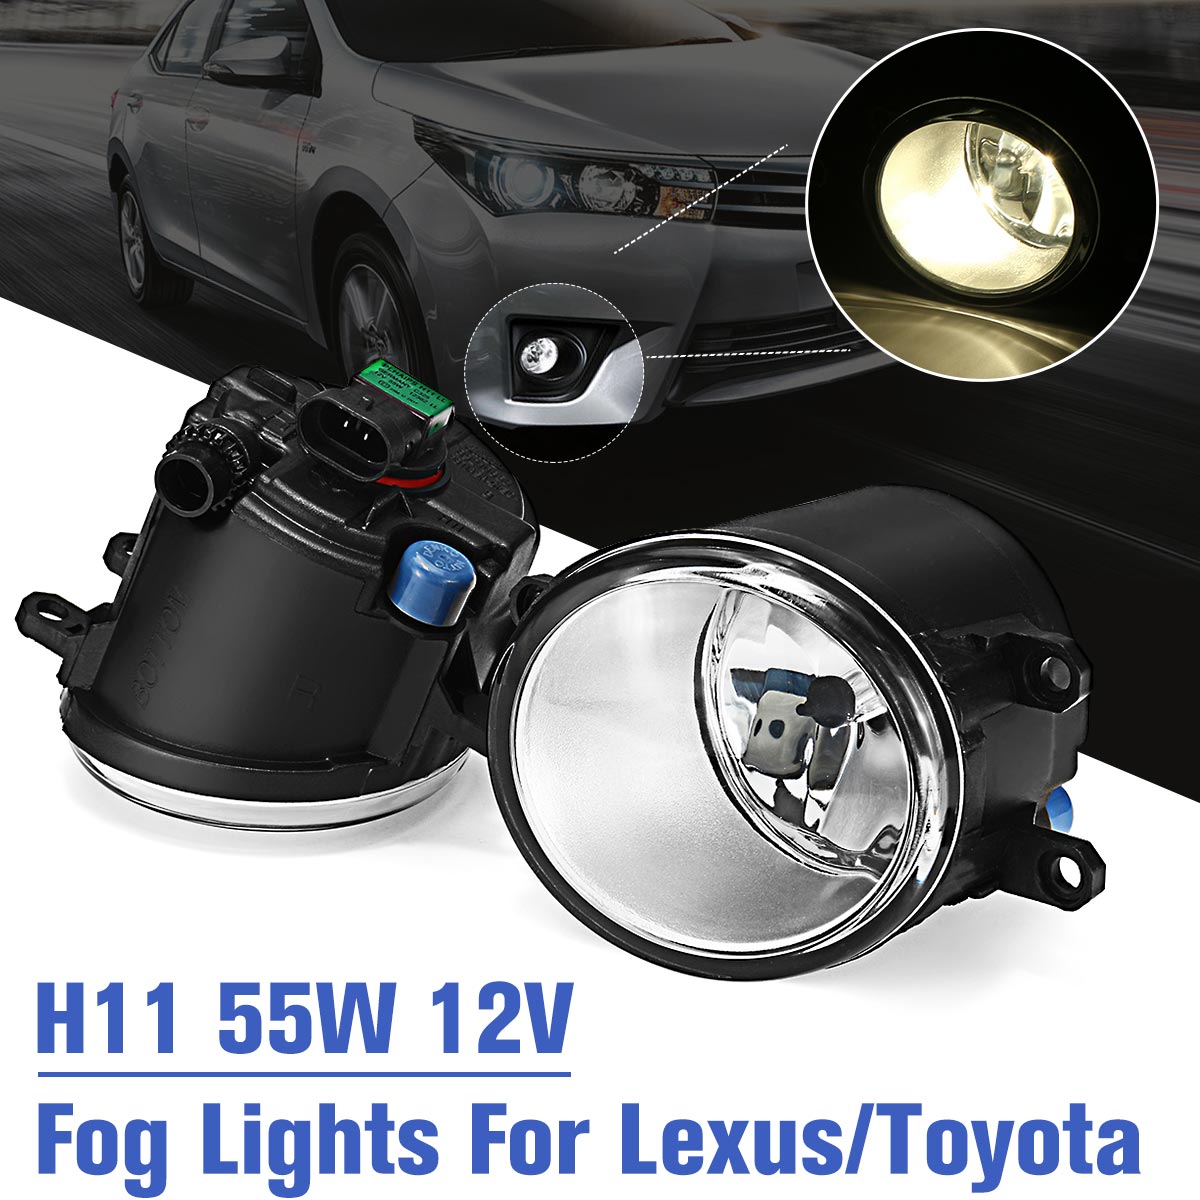 Car-Front-Bumper-Fog-Lights-Pair-with-H11-Bulbs-Amber-for-LexusToyota-8122153290-1406774